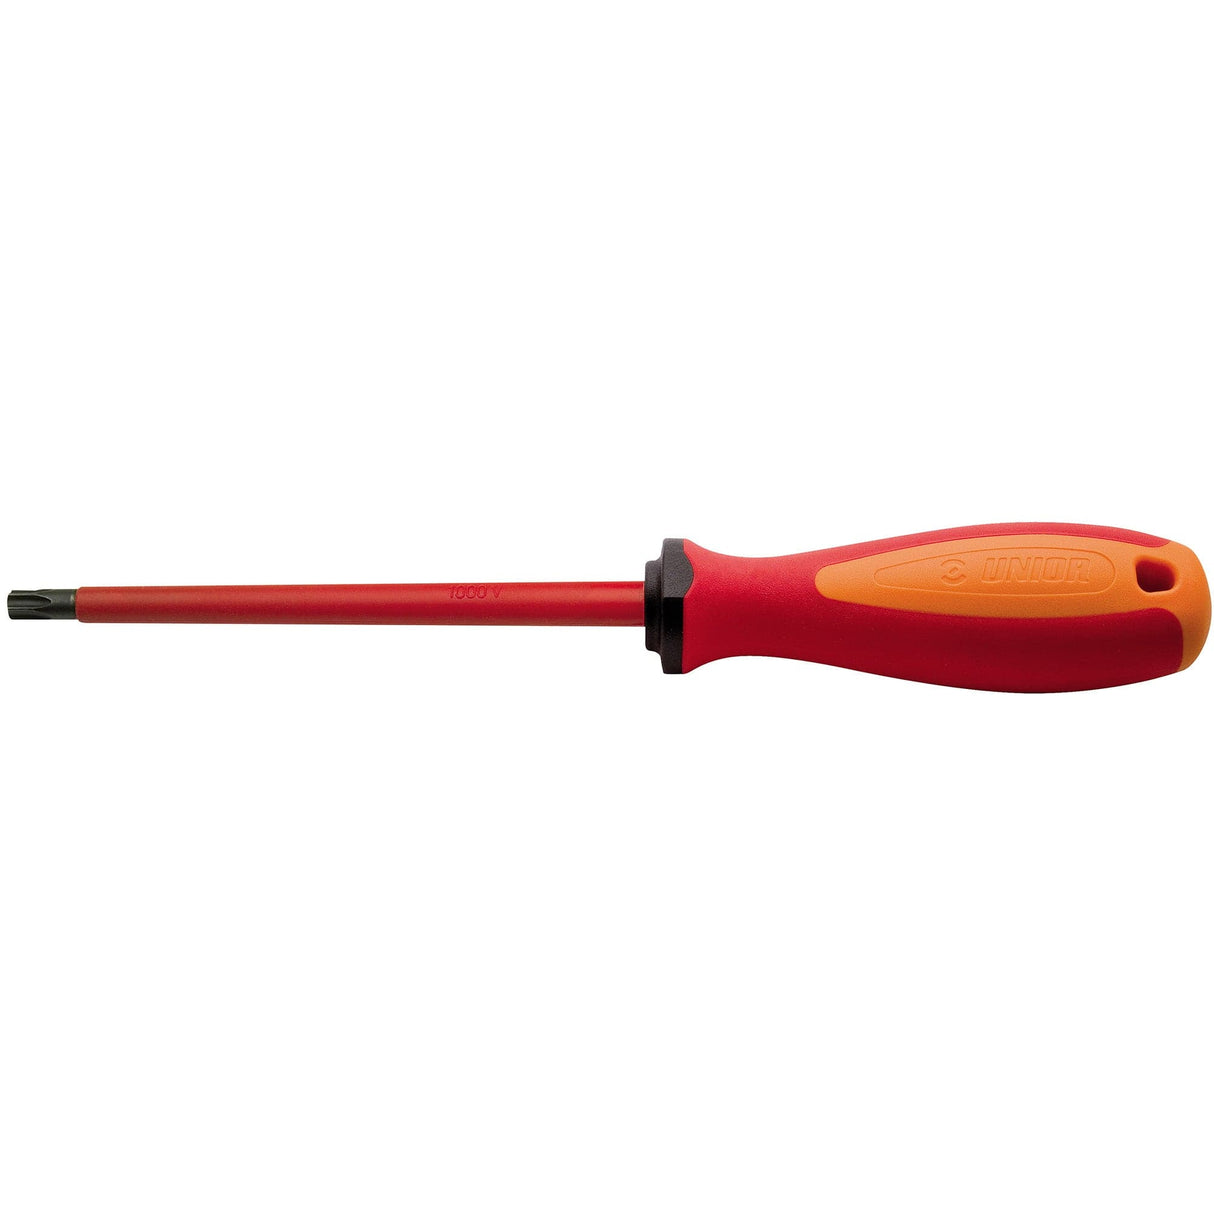 Unior Screwdriver Tbi With Tx Profile And Hole: Red Tr 27